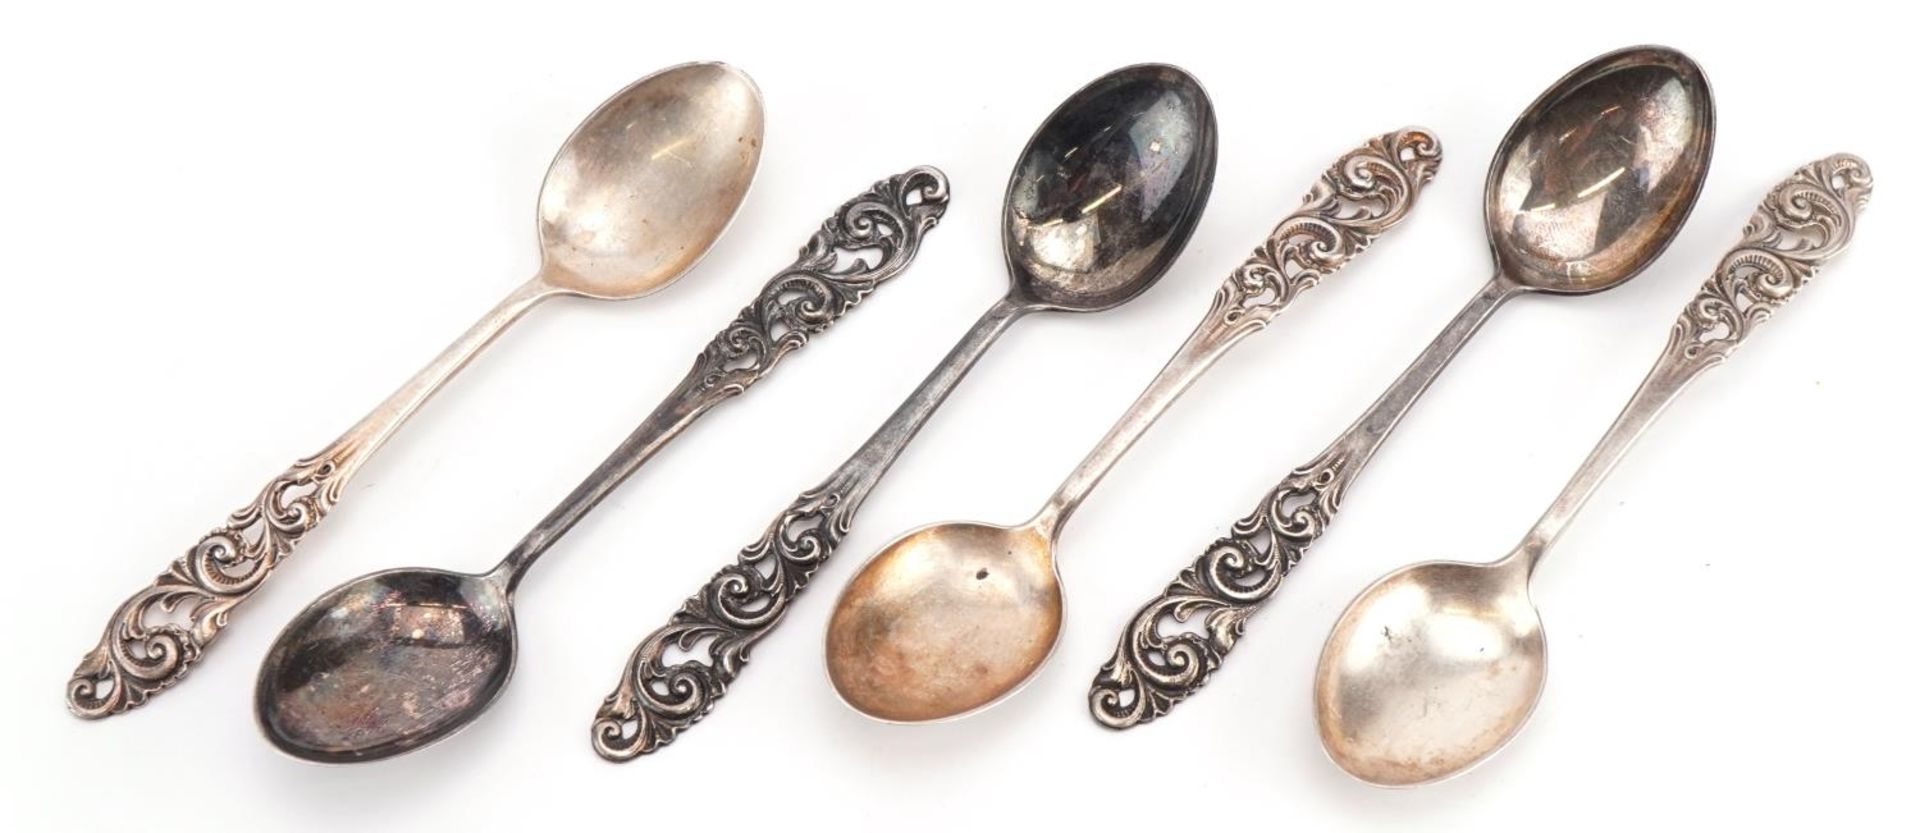 Norwegian 830S silver teaspoons with pierced terminals, 11.5cm in length, 63.0g